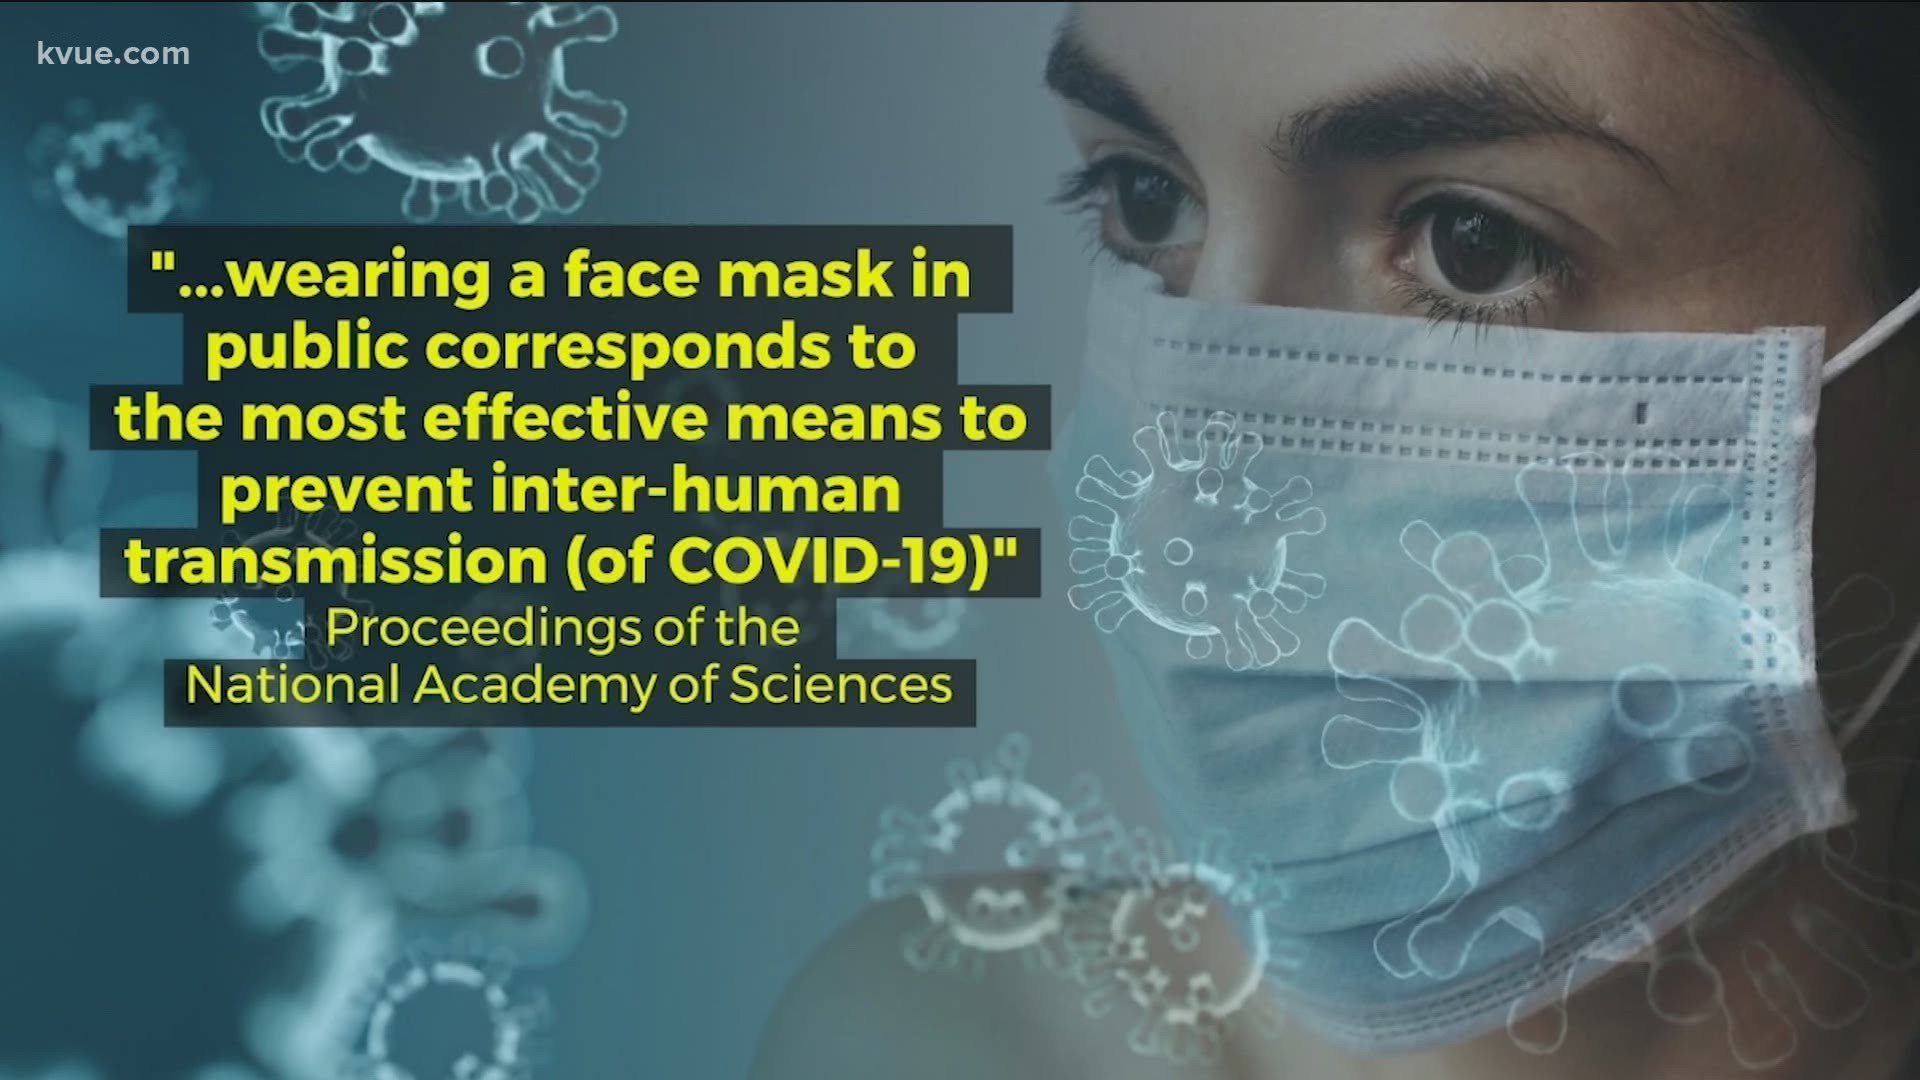 Regardless of how one feels about wearing a mask, the scientists' message is clear.